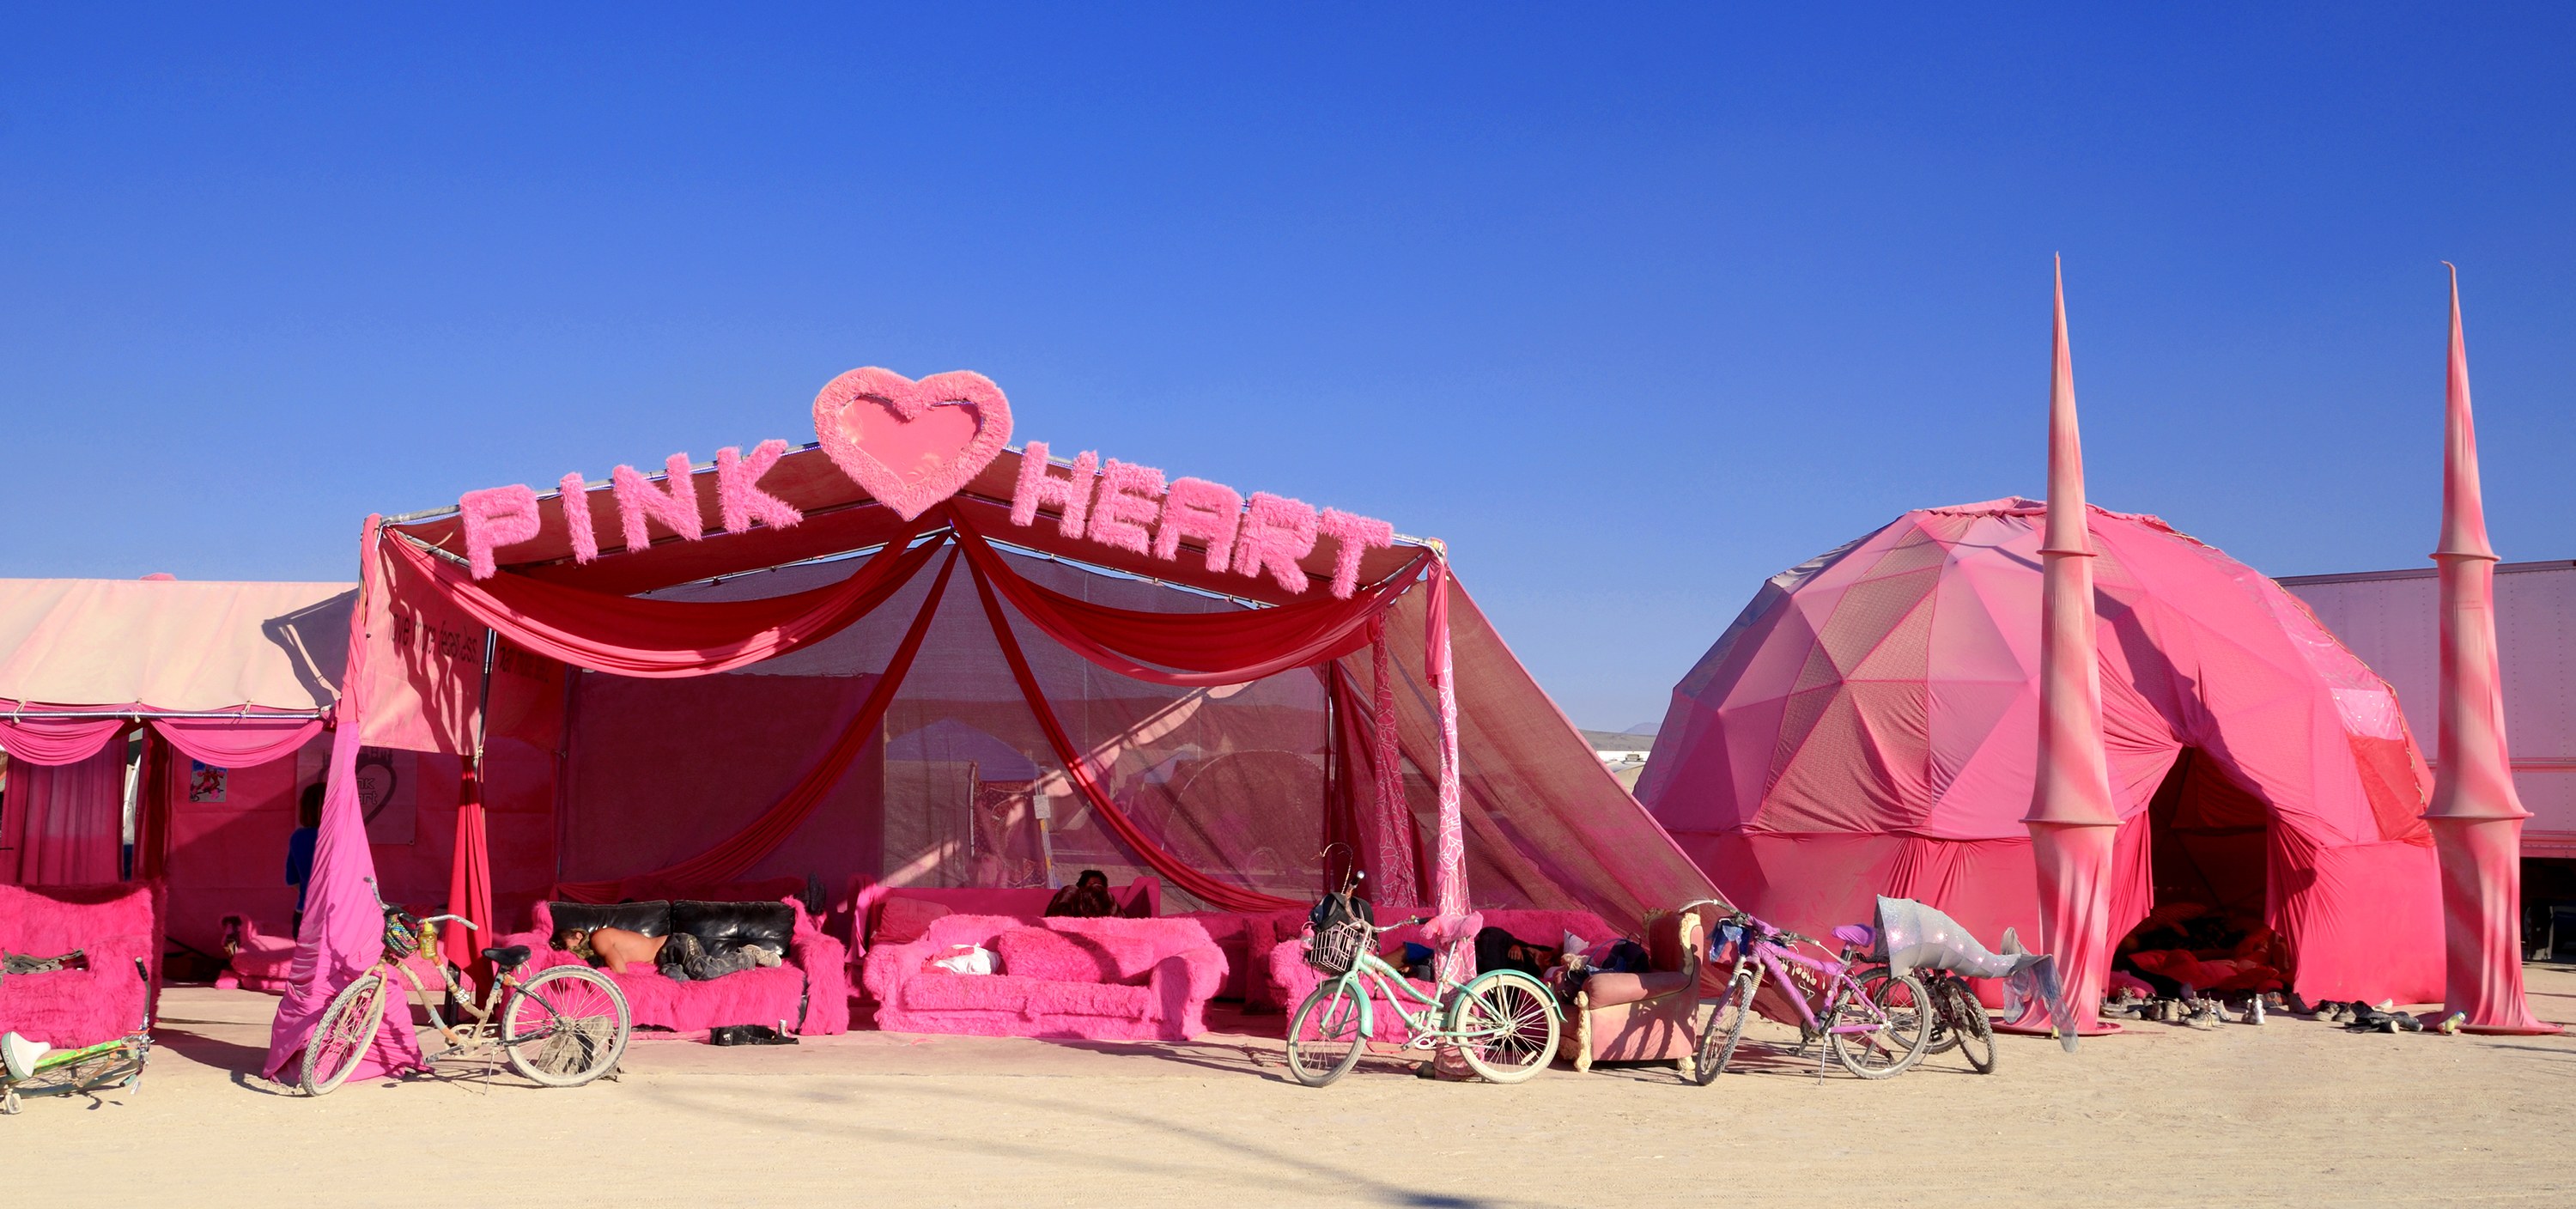 Behold Burning Man's Awesome and Totally Bizarre Architecture | WIRED